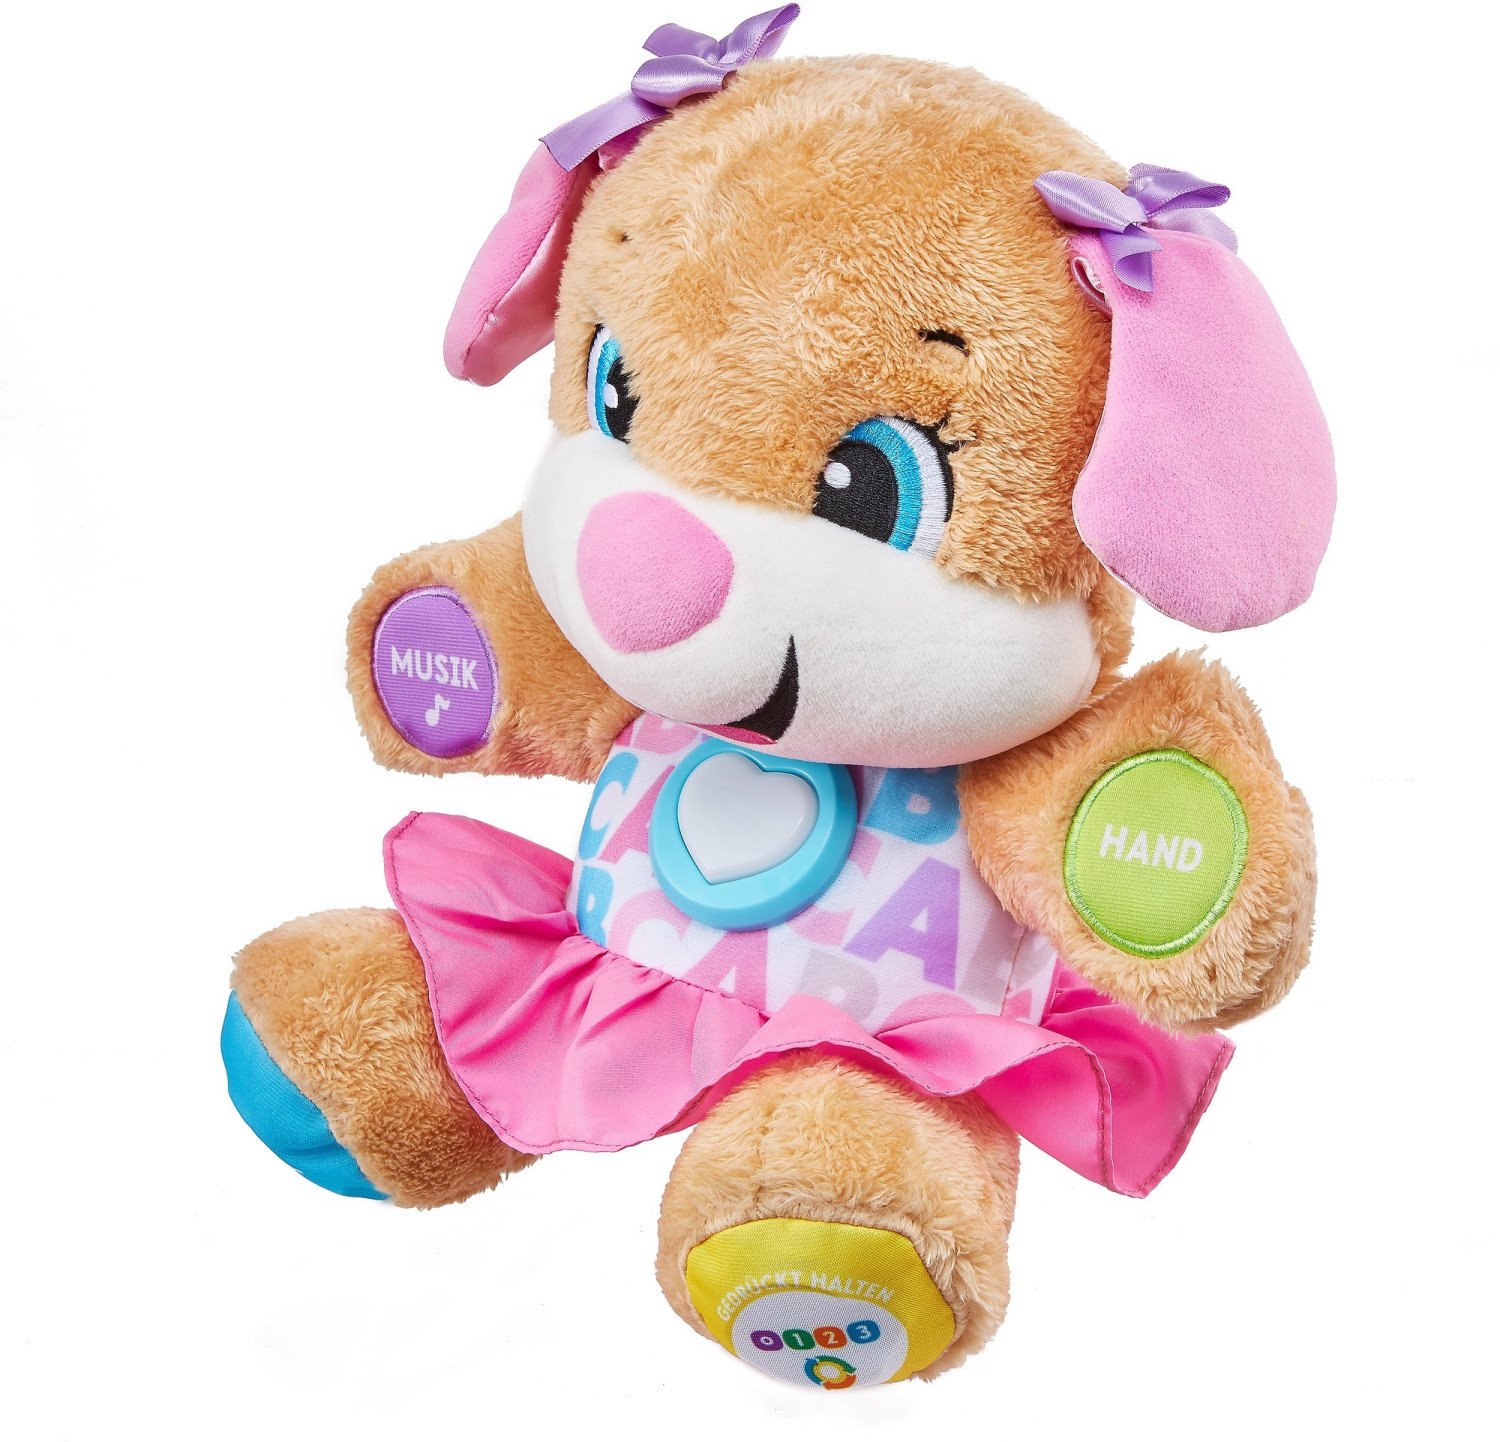 Fisher-Price Laugh and Learn Love To Play Sis